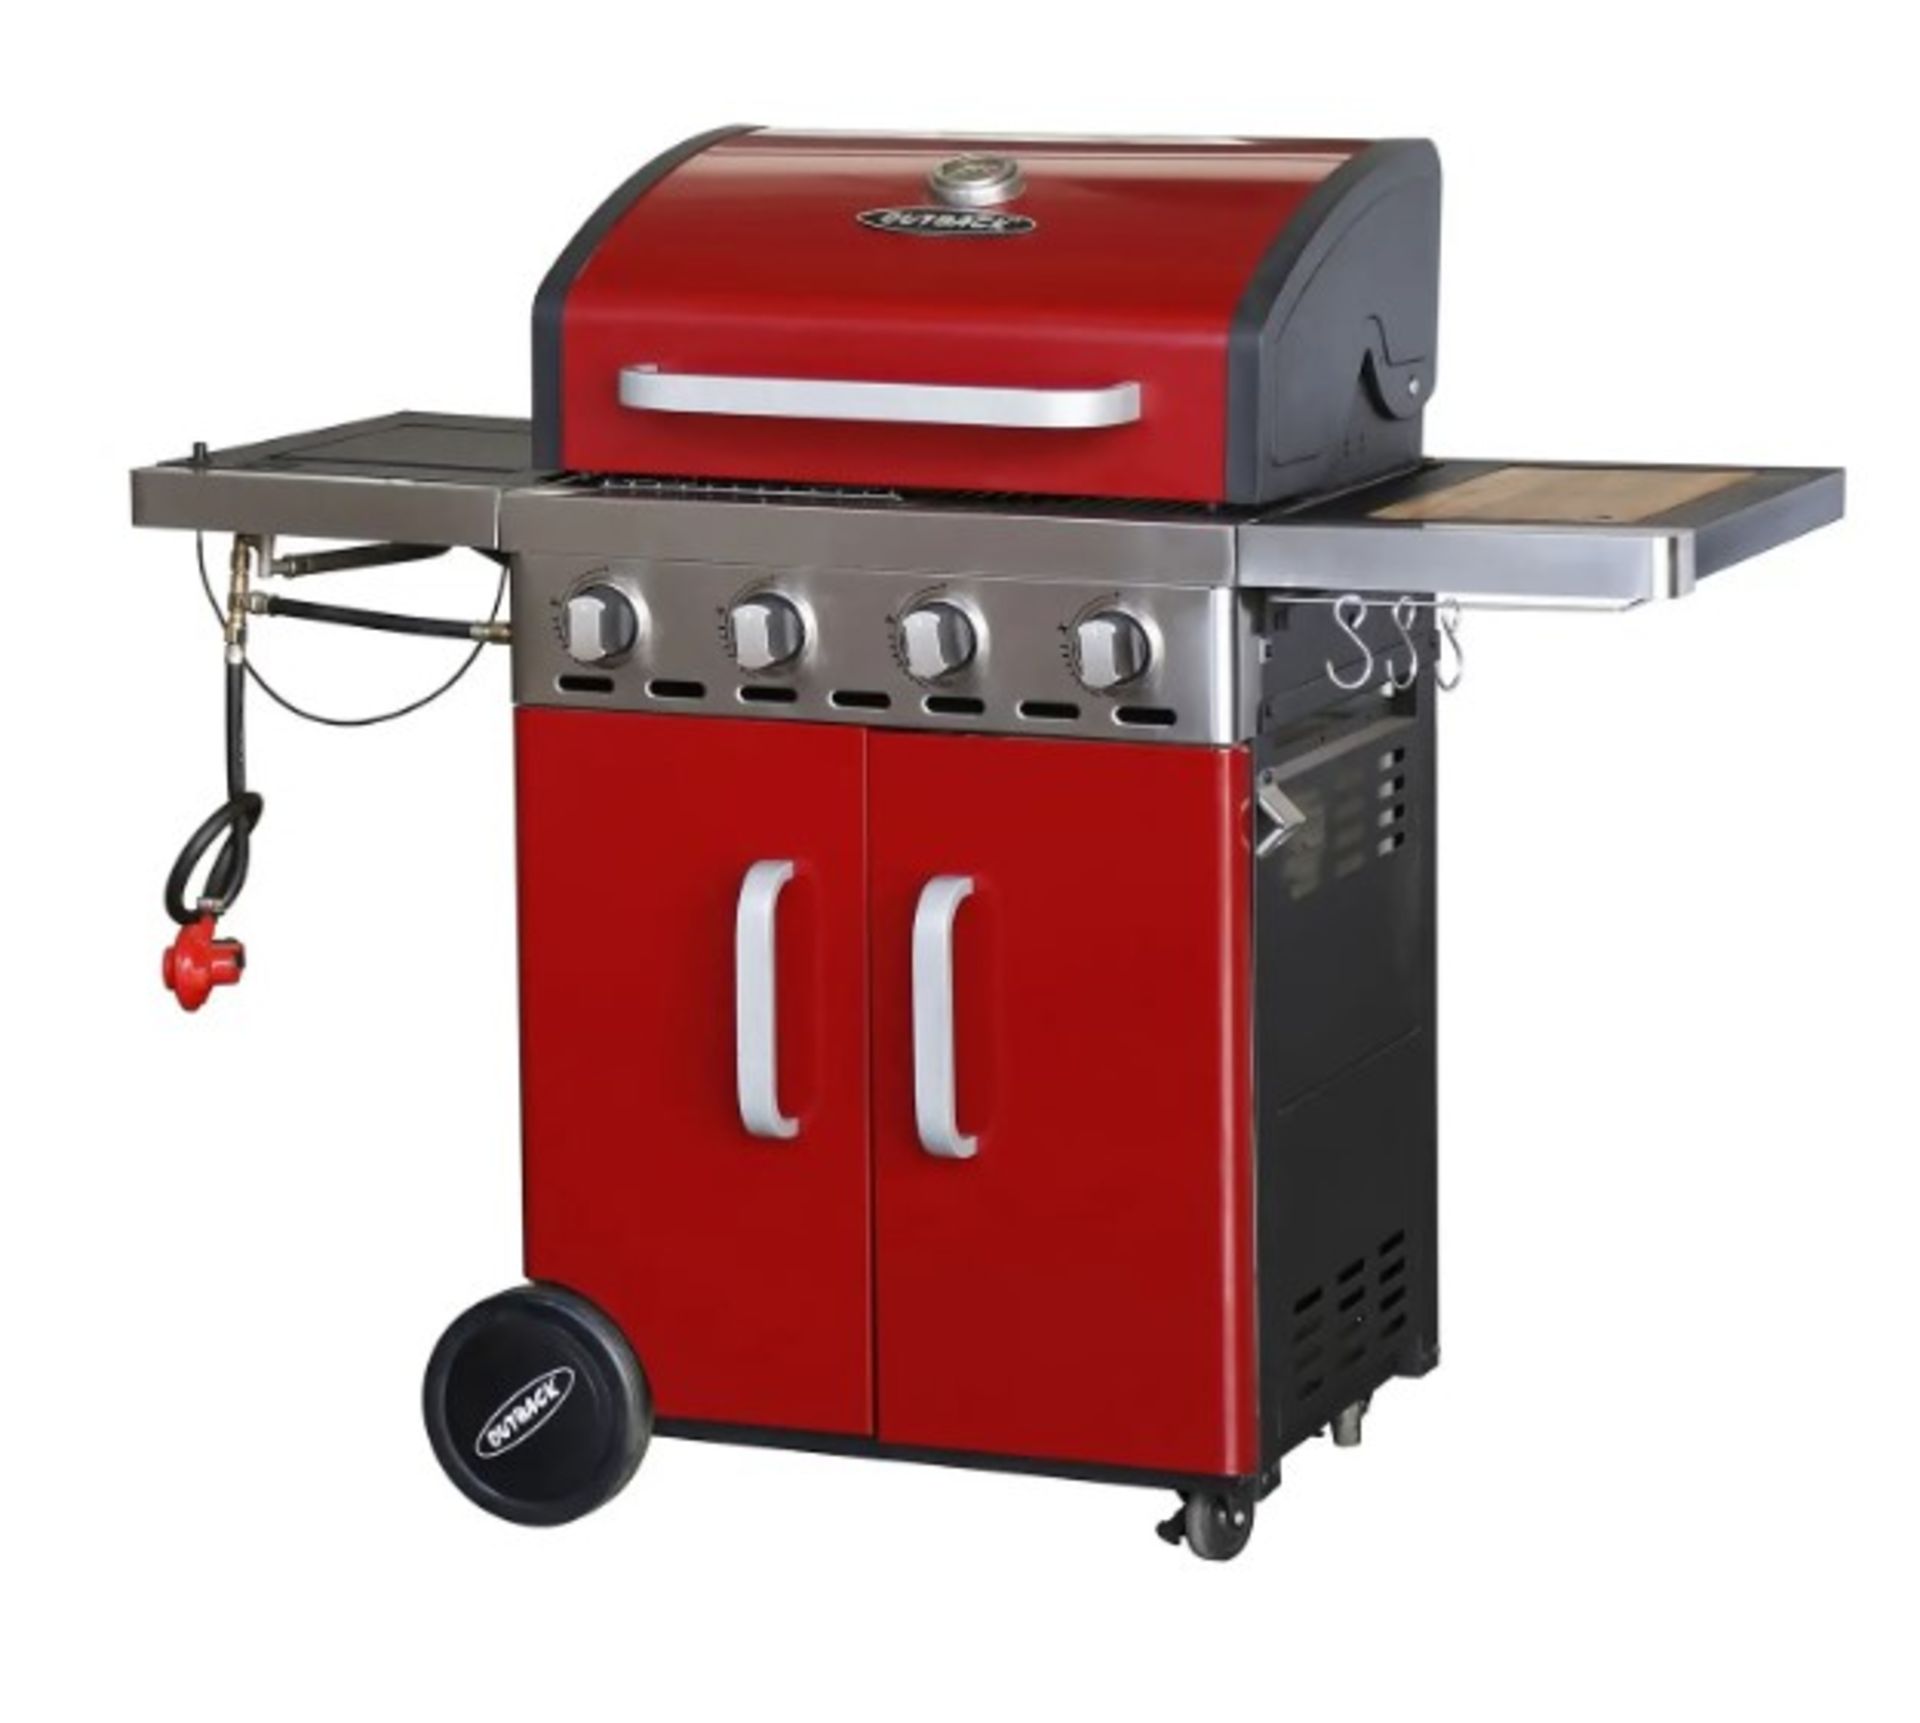 (31/P) RRP £520. Outback Saturn Hybrid 4 Burner Gas BBQ Red. Removable Multi Cooking Surface. Sid...